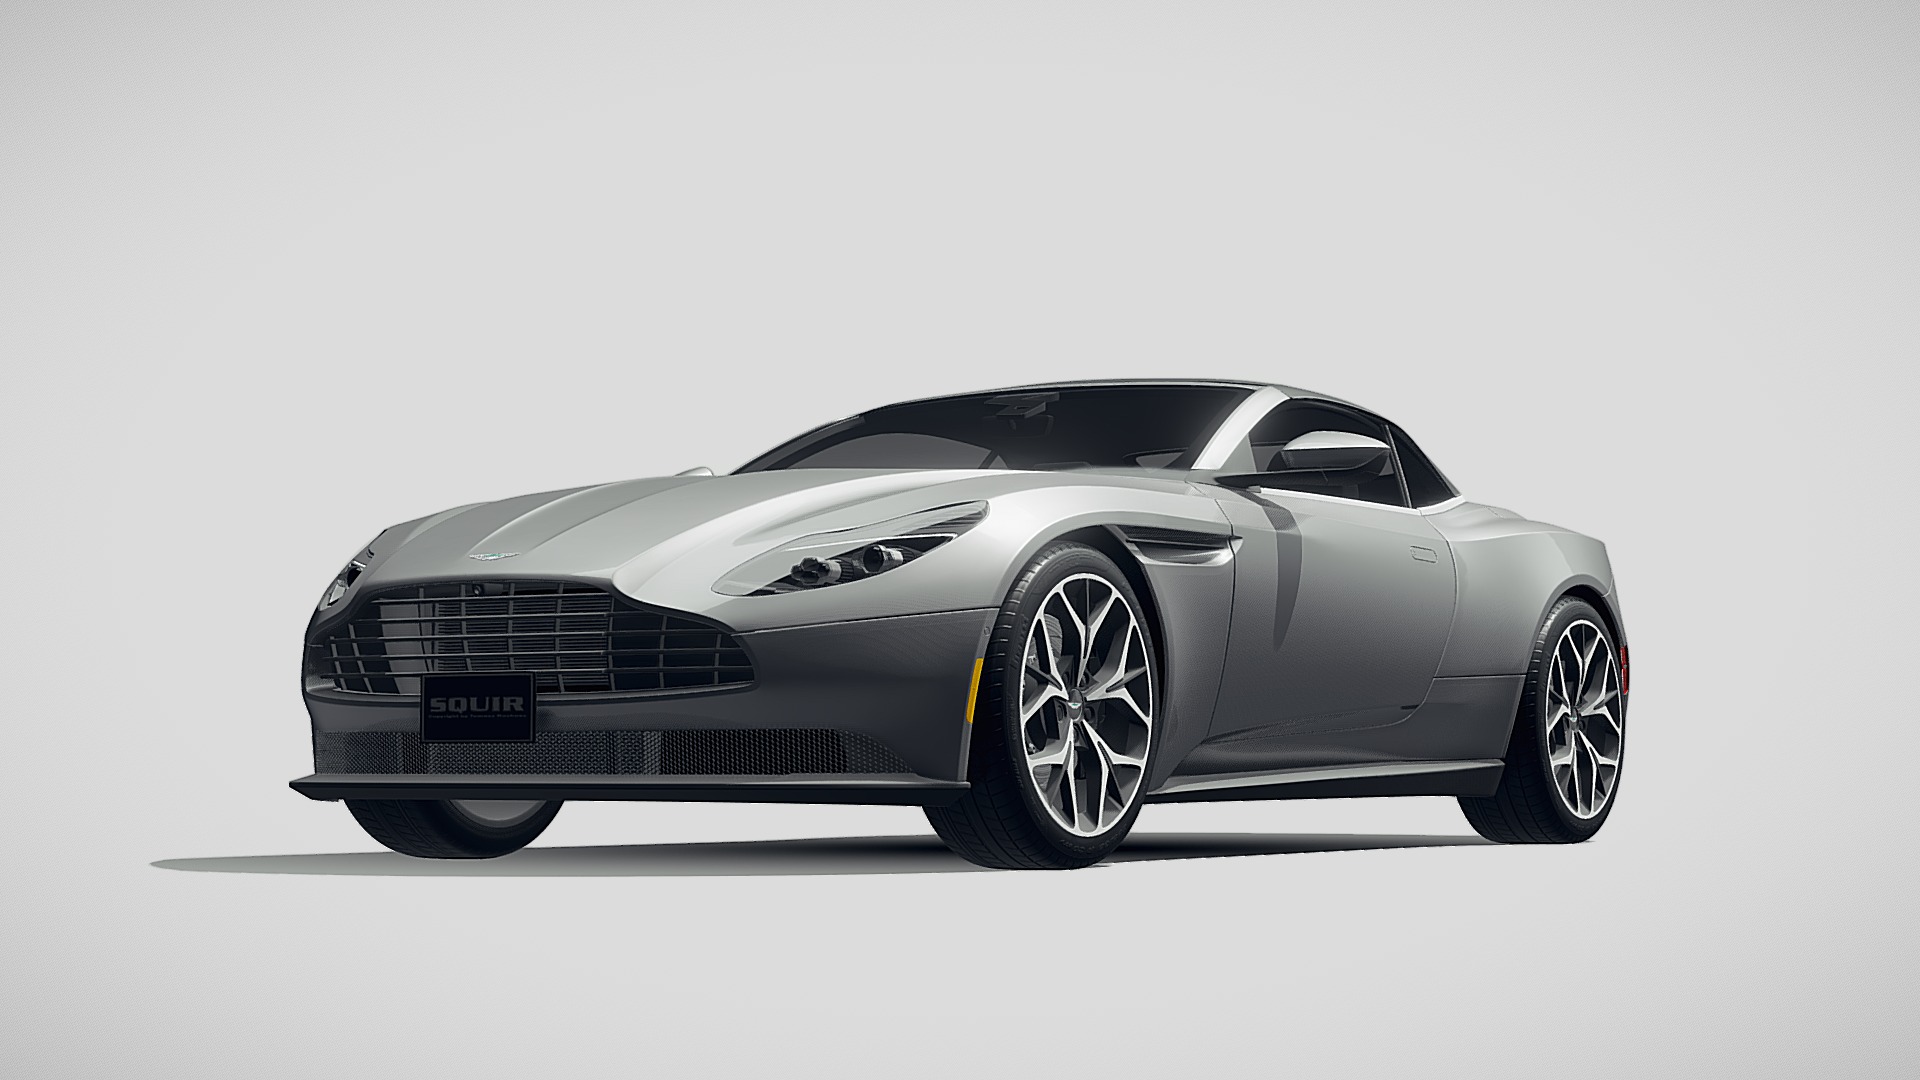 3D model Aston Martin DB11 volante 2019 - This is a 3D model of the Aston Martin DB11 volante 2019. The 3D model is about a silver sports car.